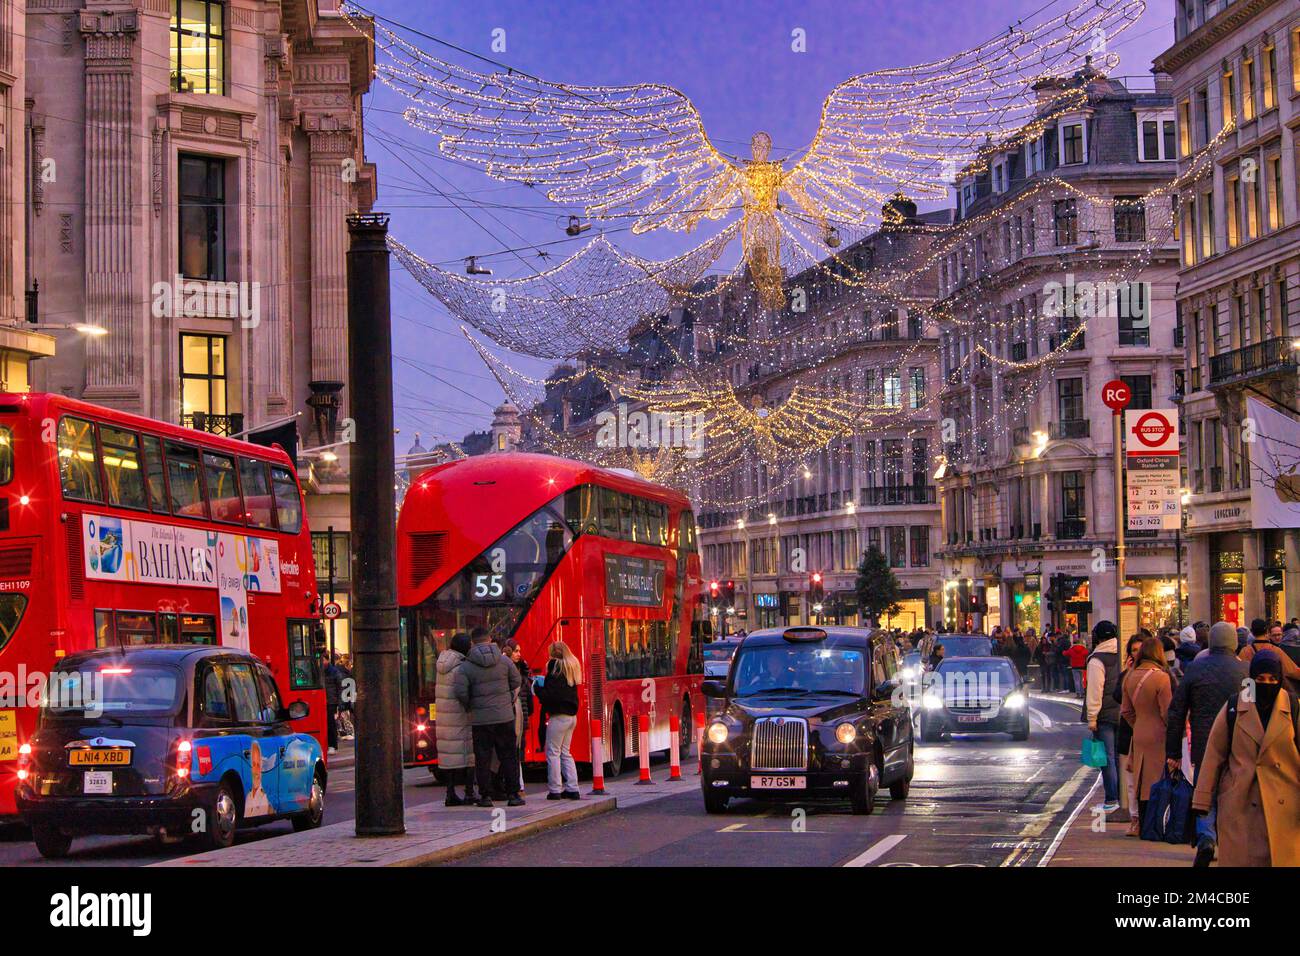 Regent Street, London - Crowds of shoppers walking between brightly lit department stores and holiday traffic underneath Christmas lights Stock Photo